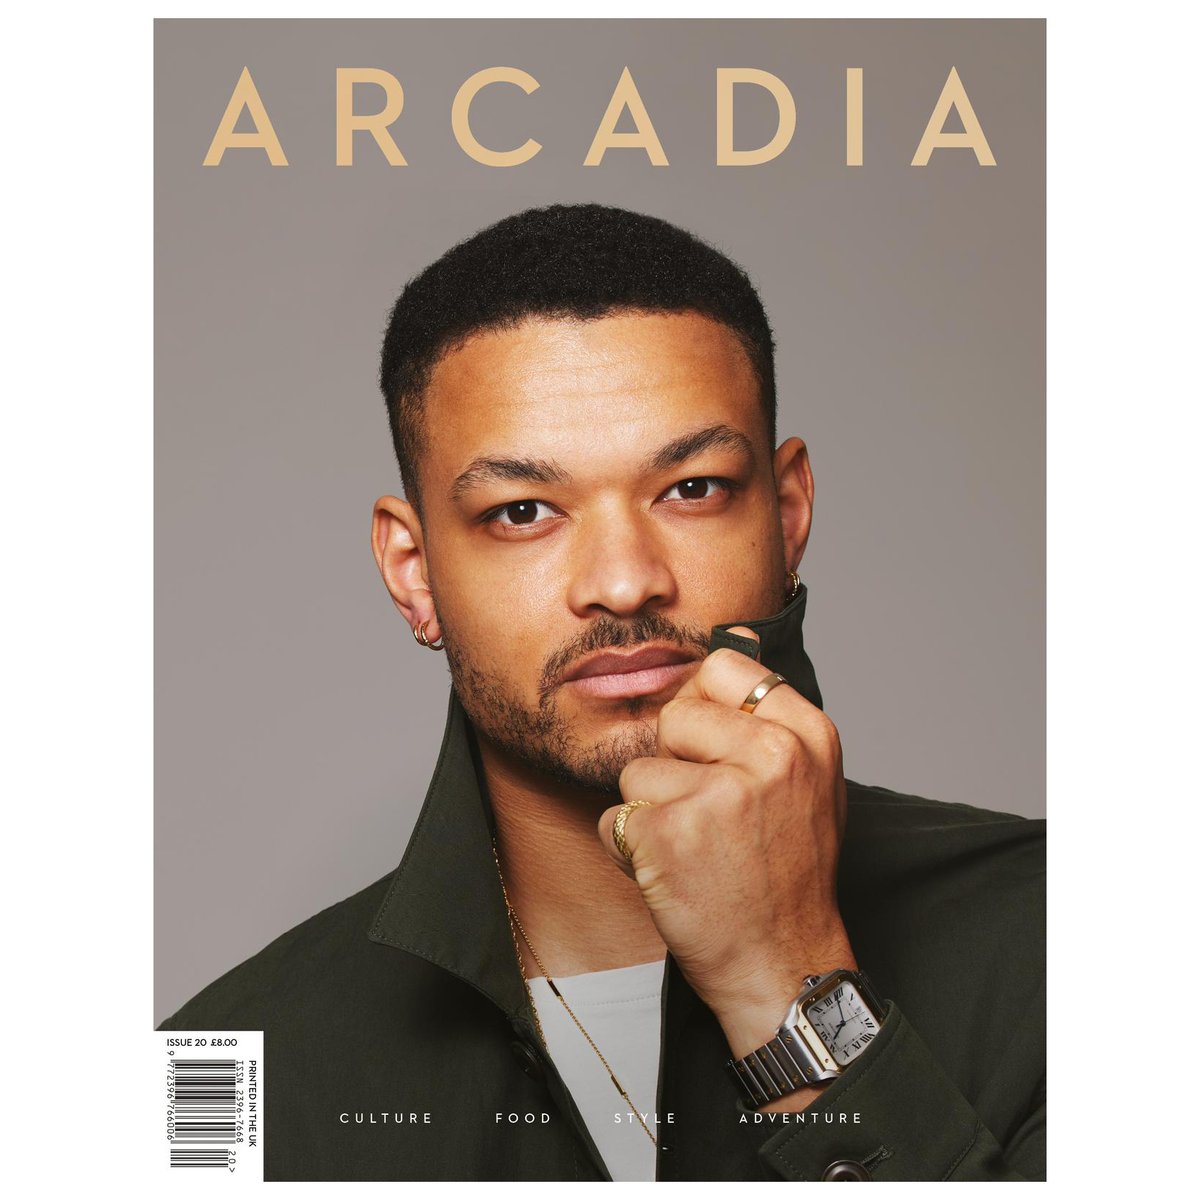 Arcadia magazine first Male Solo cover for the one and only @steven @thearcadiaonline 🖤 Creative Direction: @jayxbest Editor: @monichatully Photographer: @catherineharbour Stylist: @jennifer.michalski.bray.style Grooming: @paulamccash Interview: @alicelucybradley #steven #dia